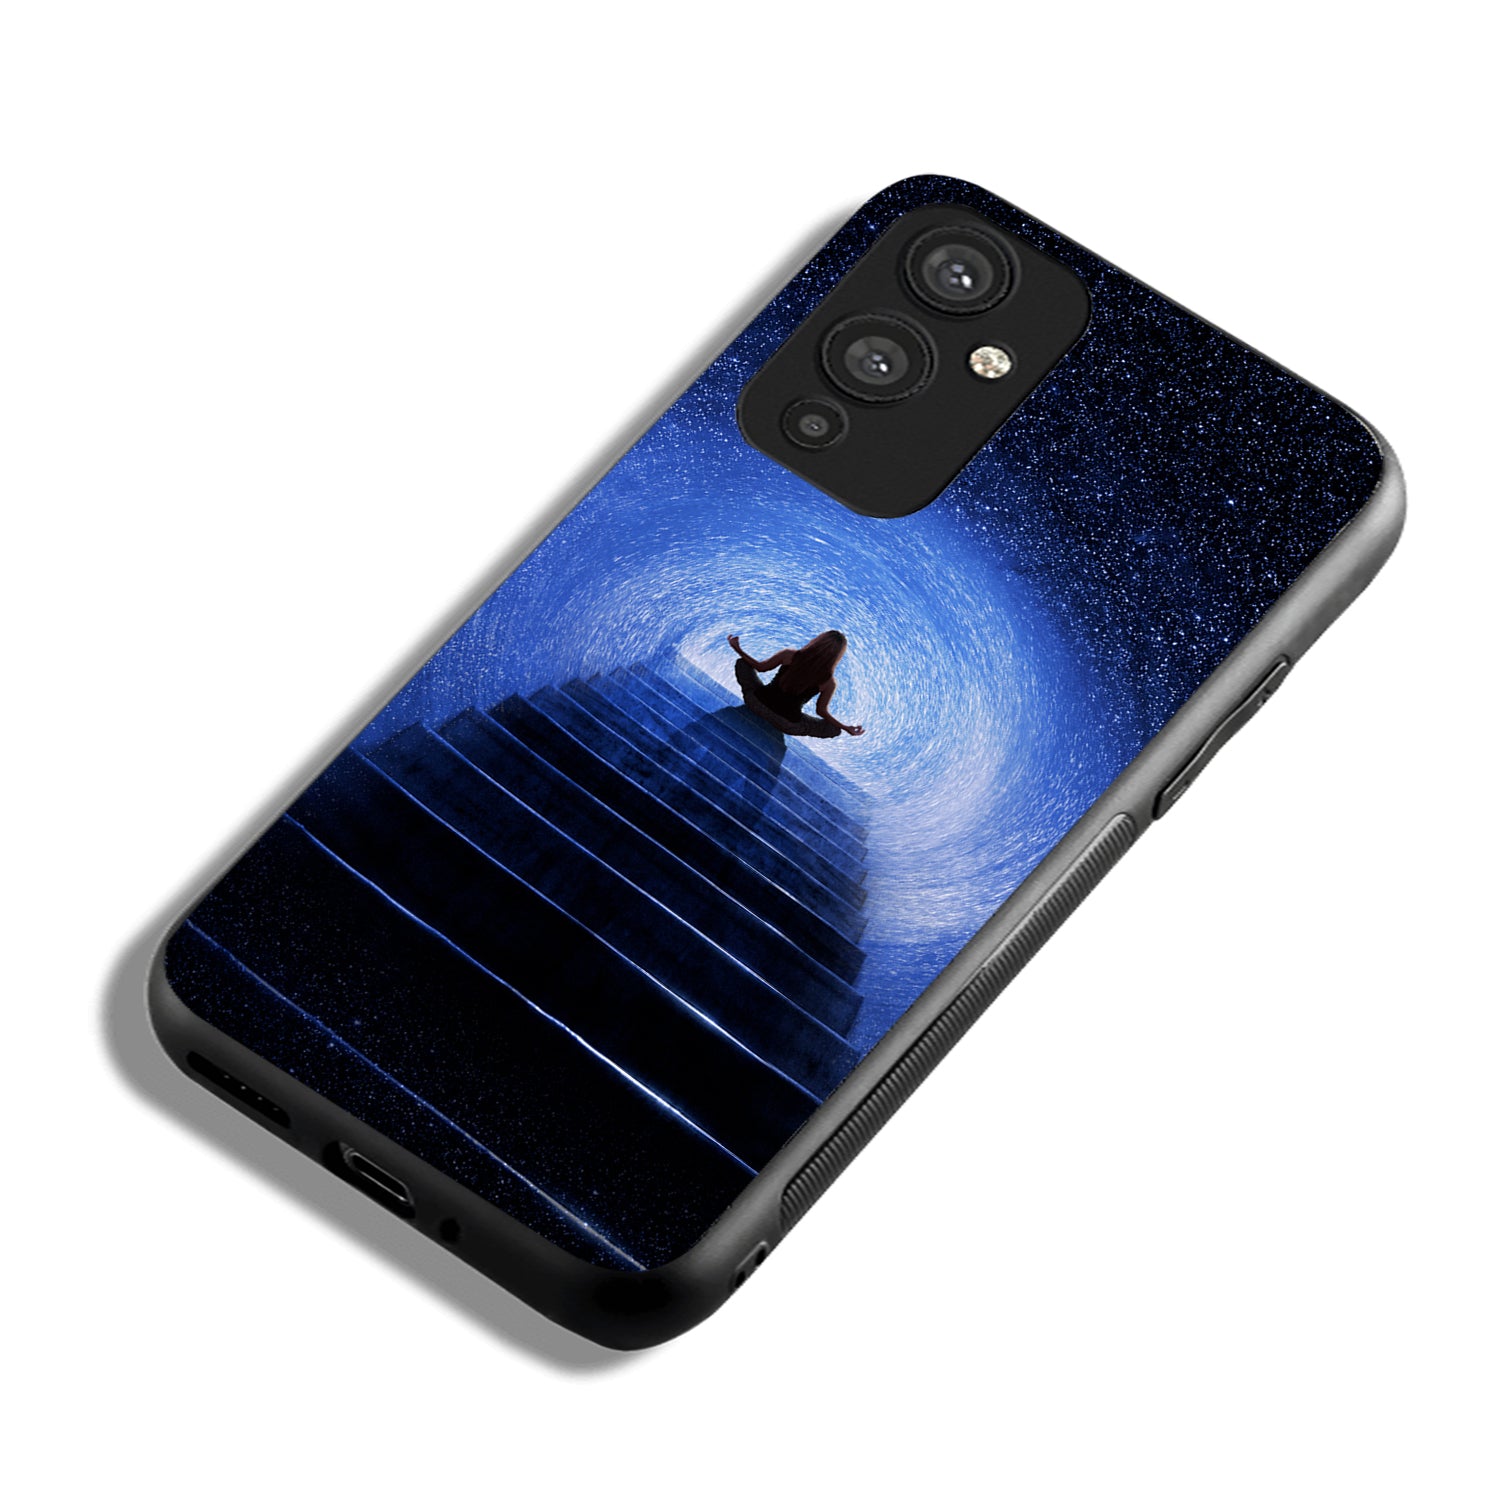 Meditate In Peace Relgious Oneplus 9 Back Case